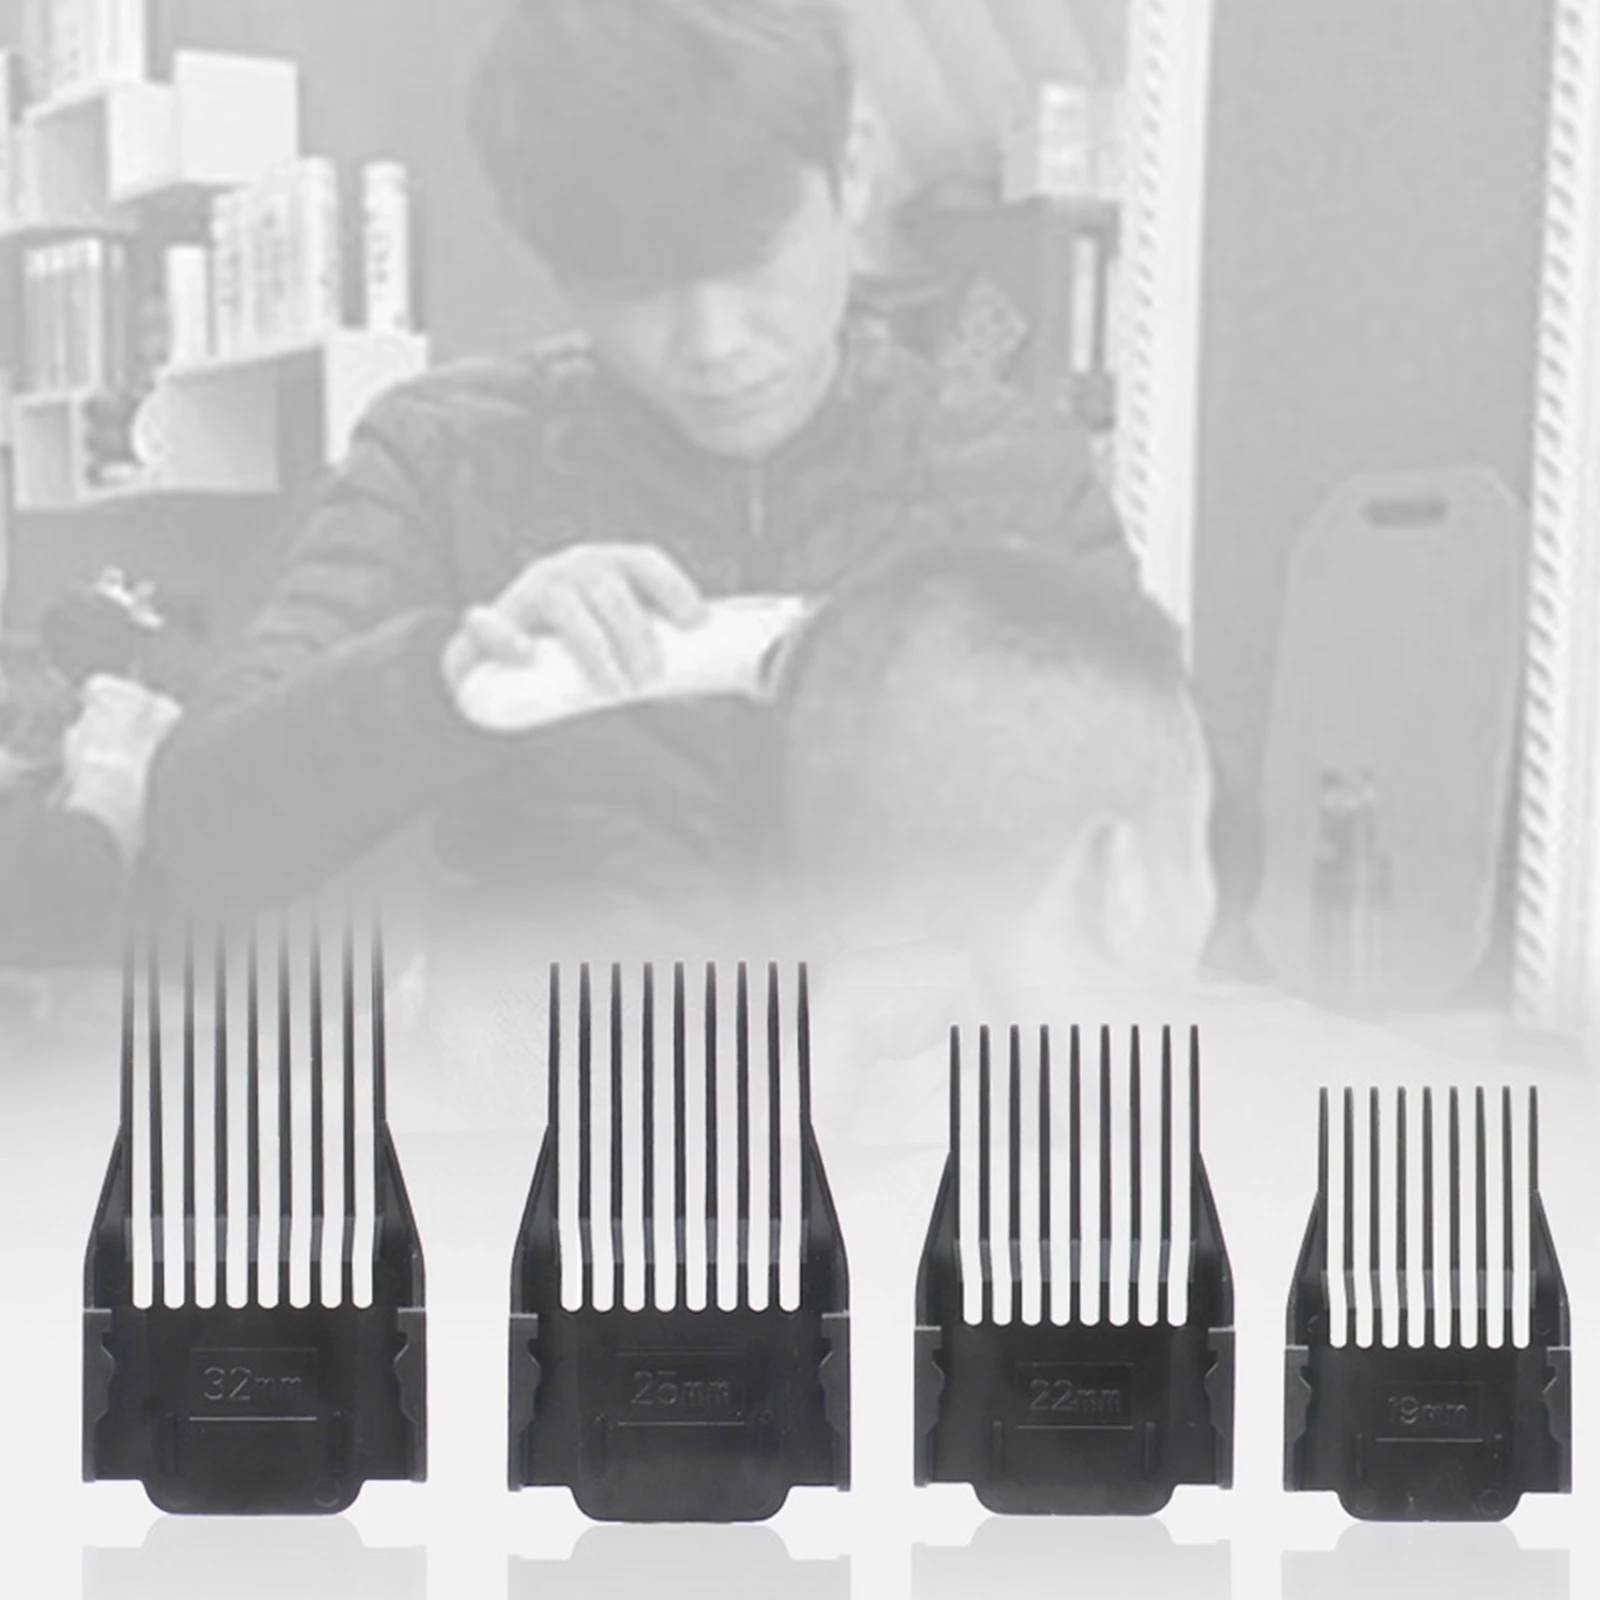 4x Hair Clipper Guide Combs Hair Clipper Guard Combs Cutting Guides Combs Replacement Professional for Hair Clippers/Trimmers